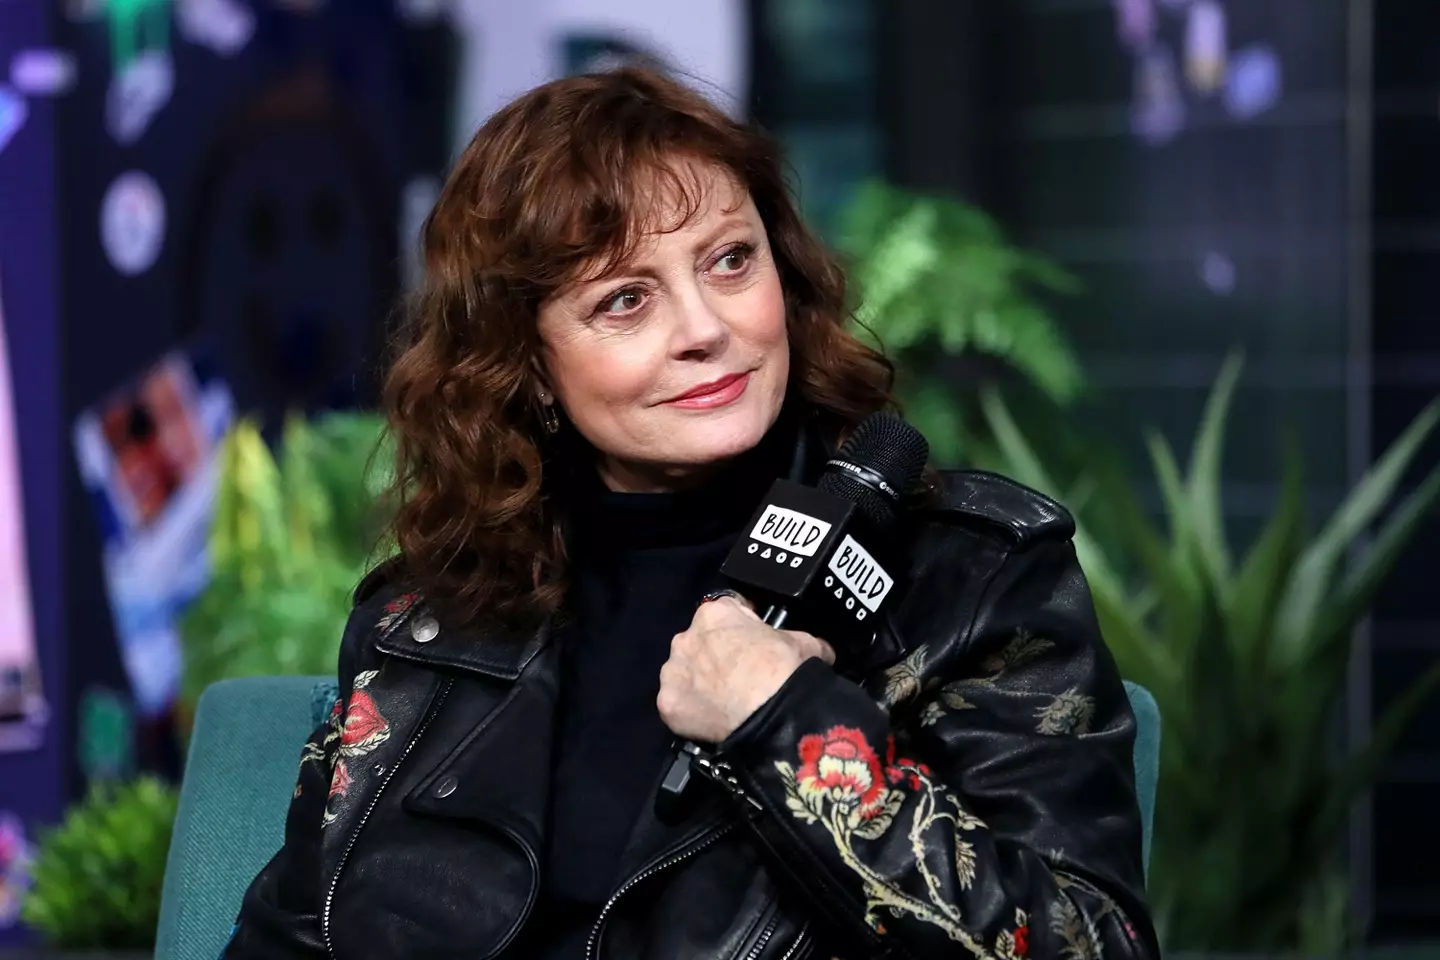 Susan Sarandon has said there's 'still time' for her to 'act slutty'.